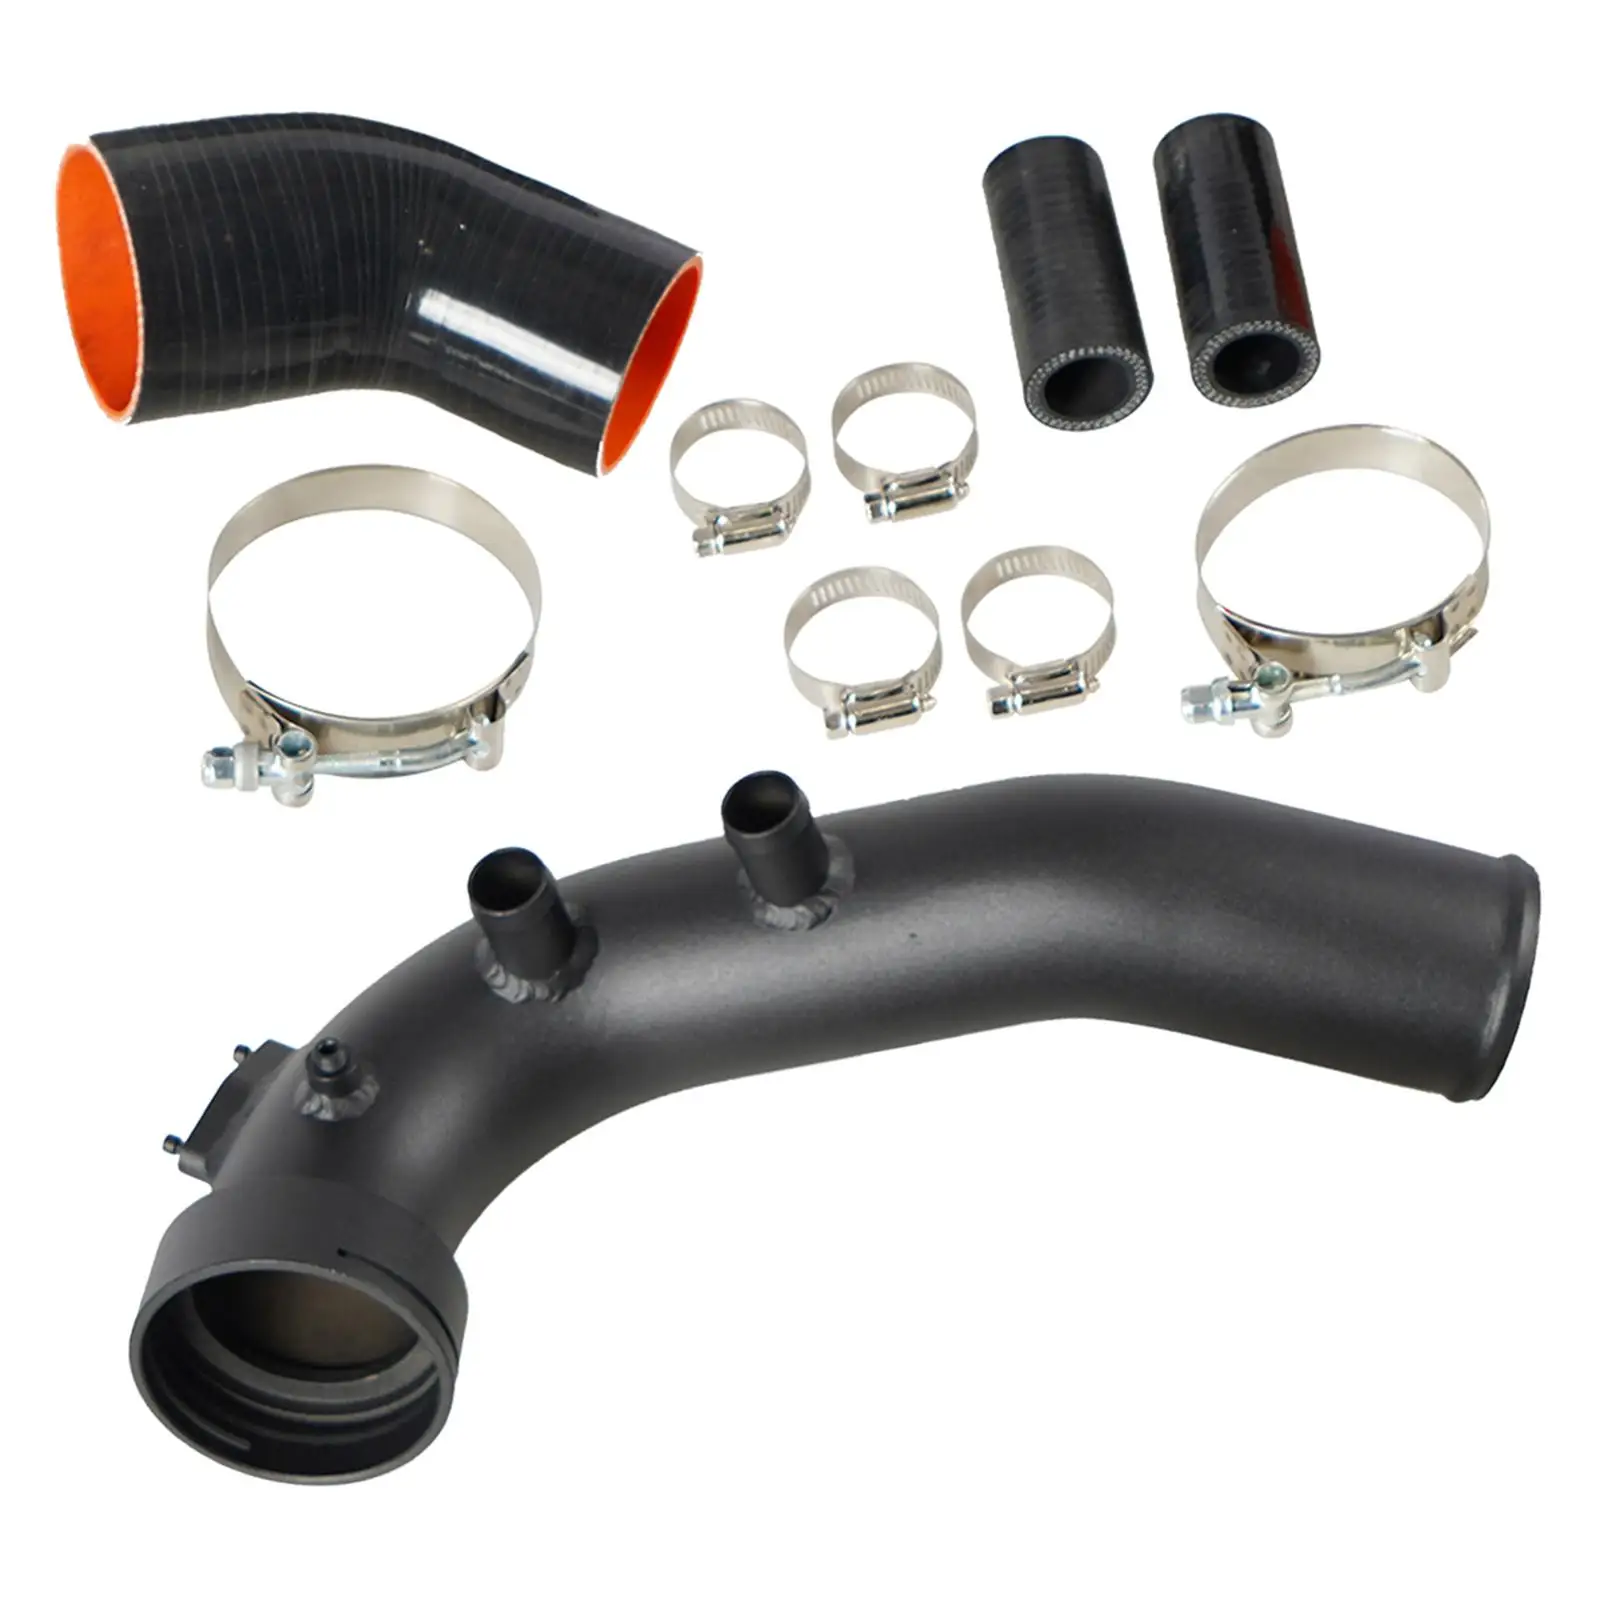 Air Intake Charge  Kit ,chagrer Intake  Hose Replacement  for  N54 3.0L charged Inline 6 Engine N54 E88 E90